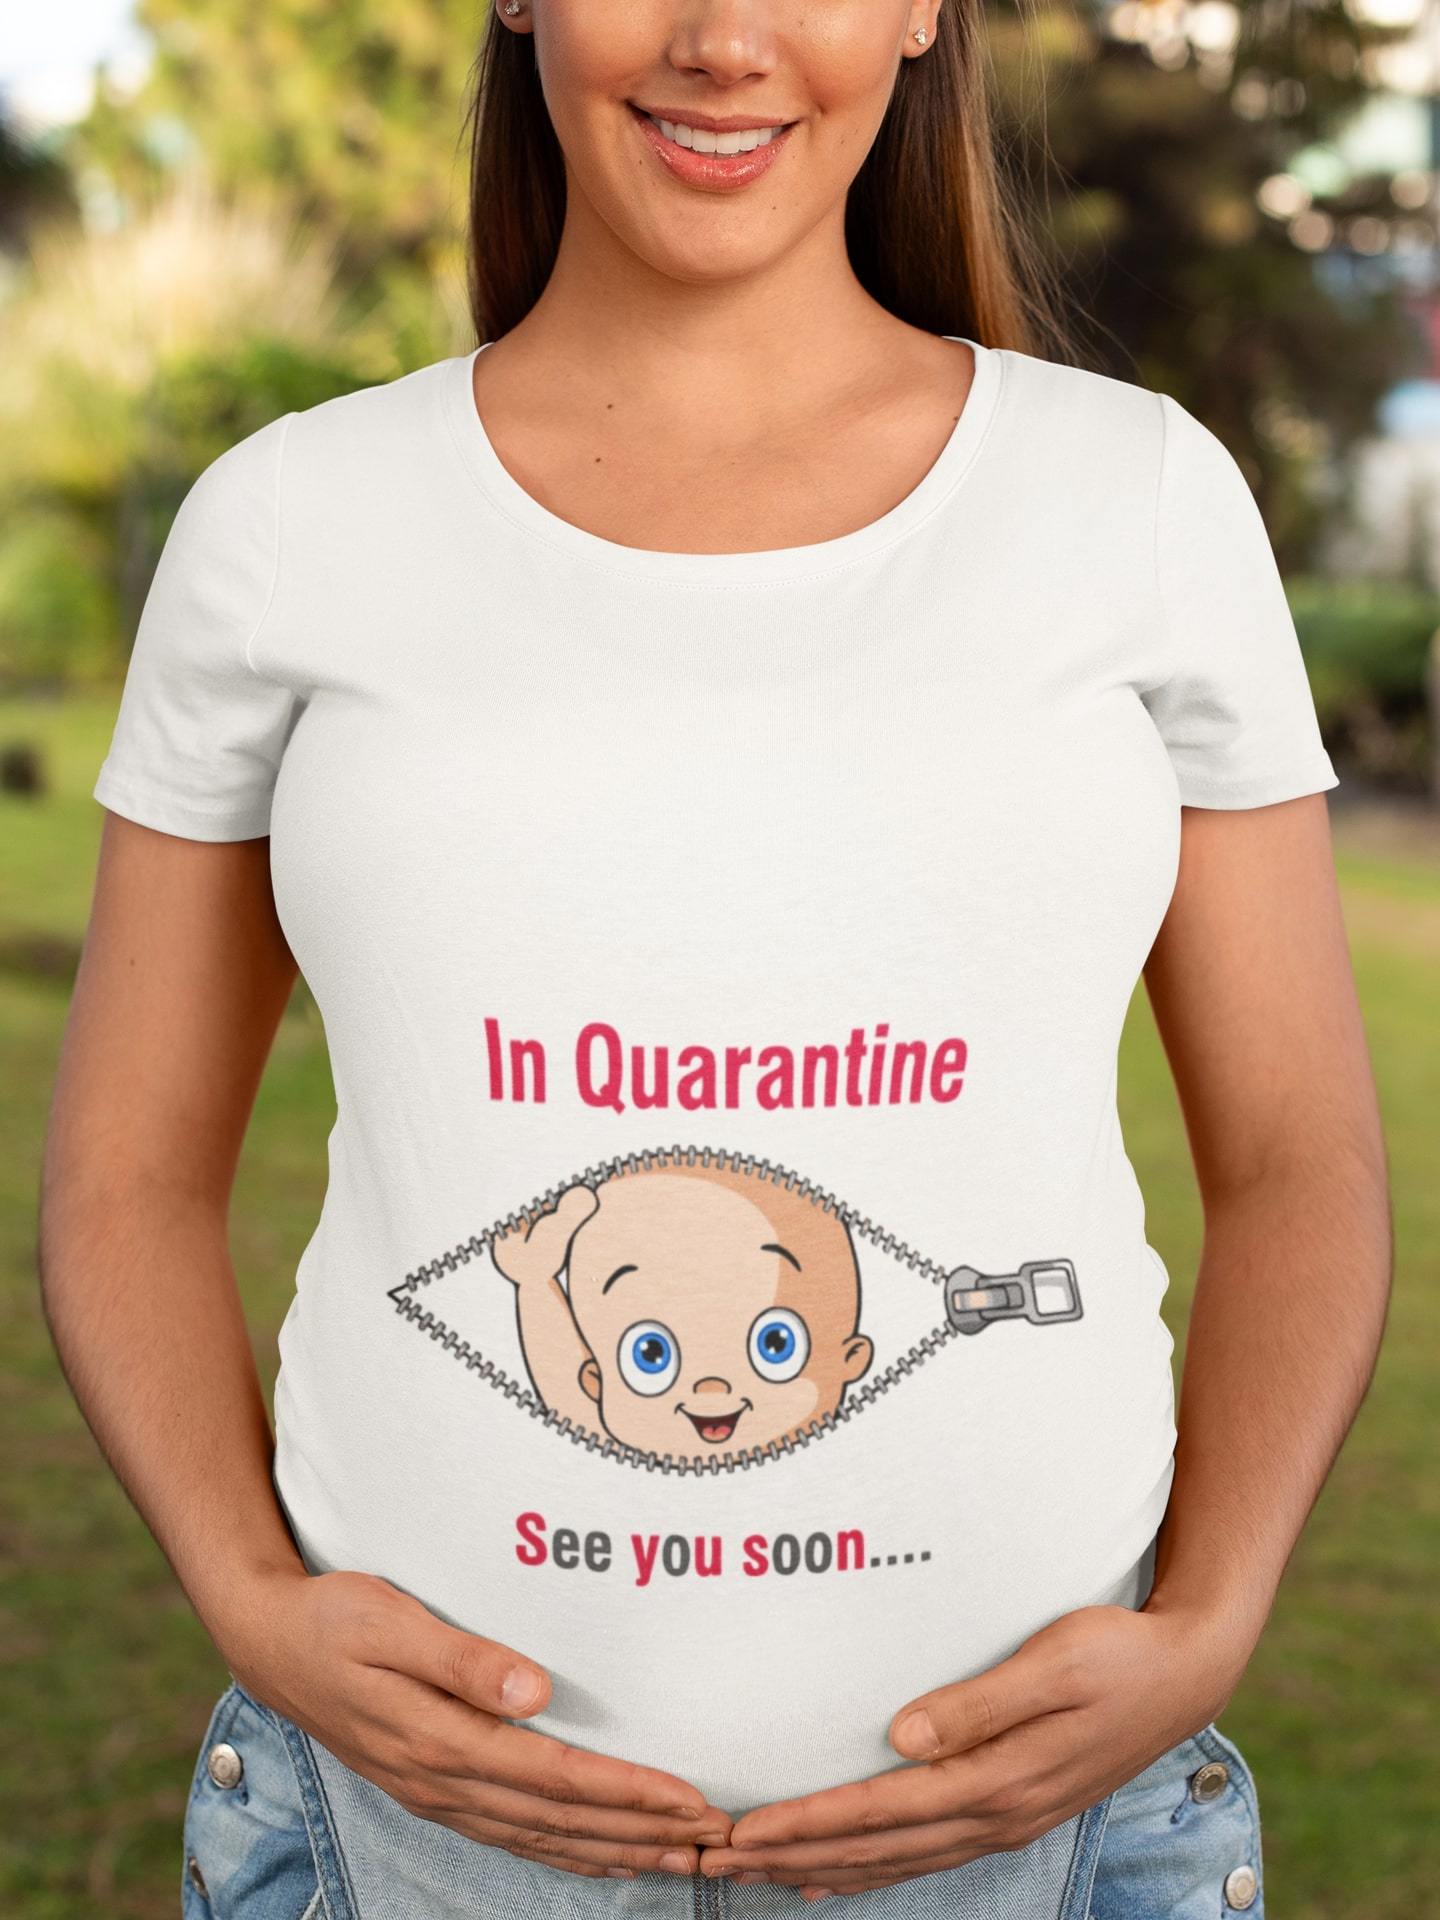 thelegalgang,Funny Baby in Quarantine Graphic Maternity T shirt,WOMEN.